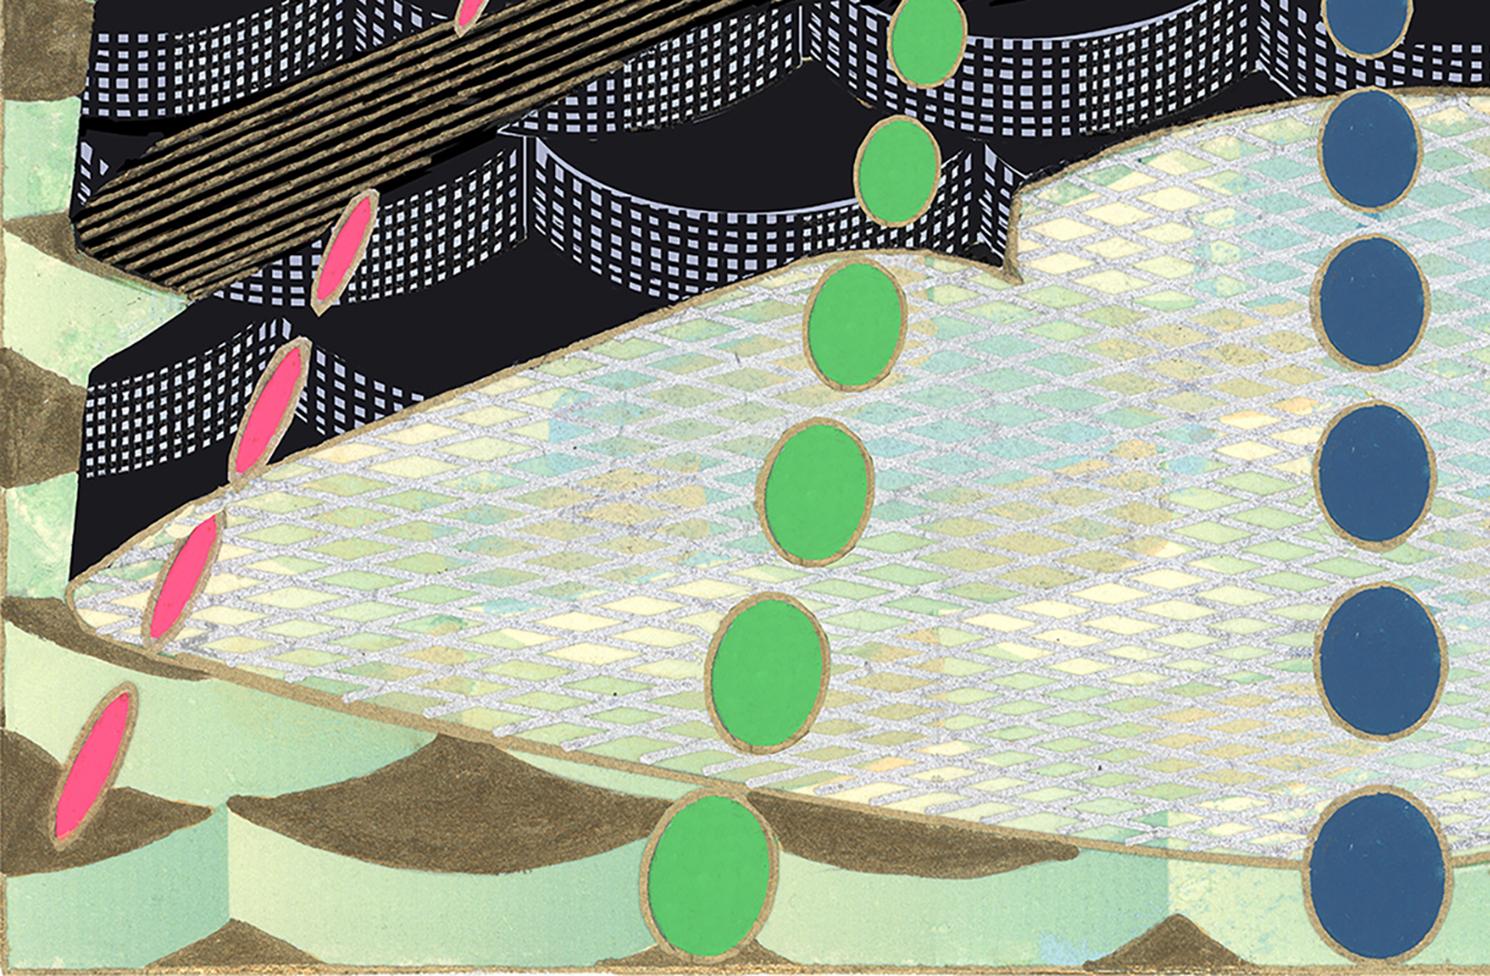 There is an Art Deco aspect to this abstract print which evocatively uses pattern, repetition, and ornamentation to create a stacked form that appears to levitate in front of a background constructed from gold and green wave-like forms. The image is